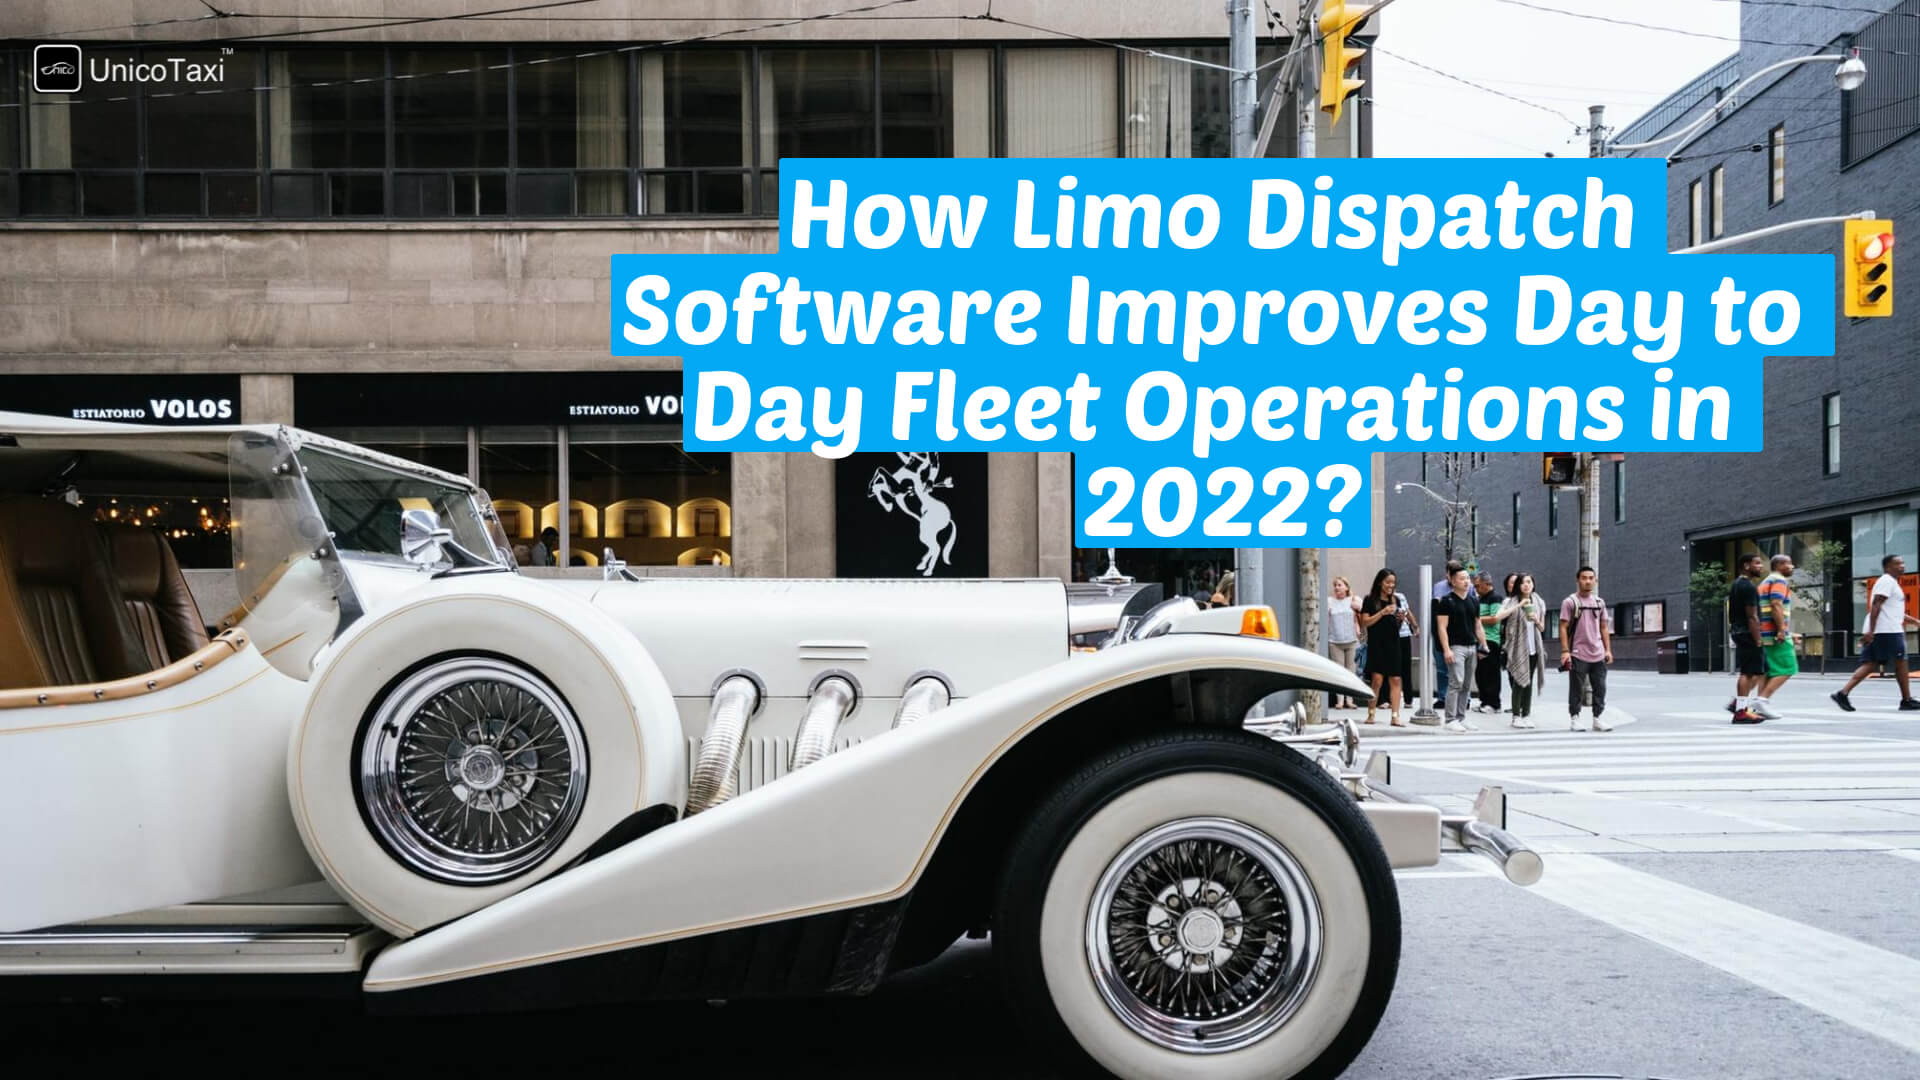 How Limo Dispatch Software Improves Day to Day Fleet Operations in 2022?